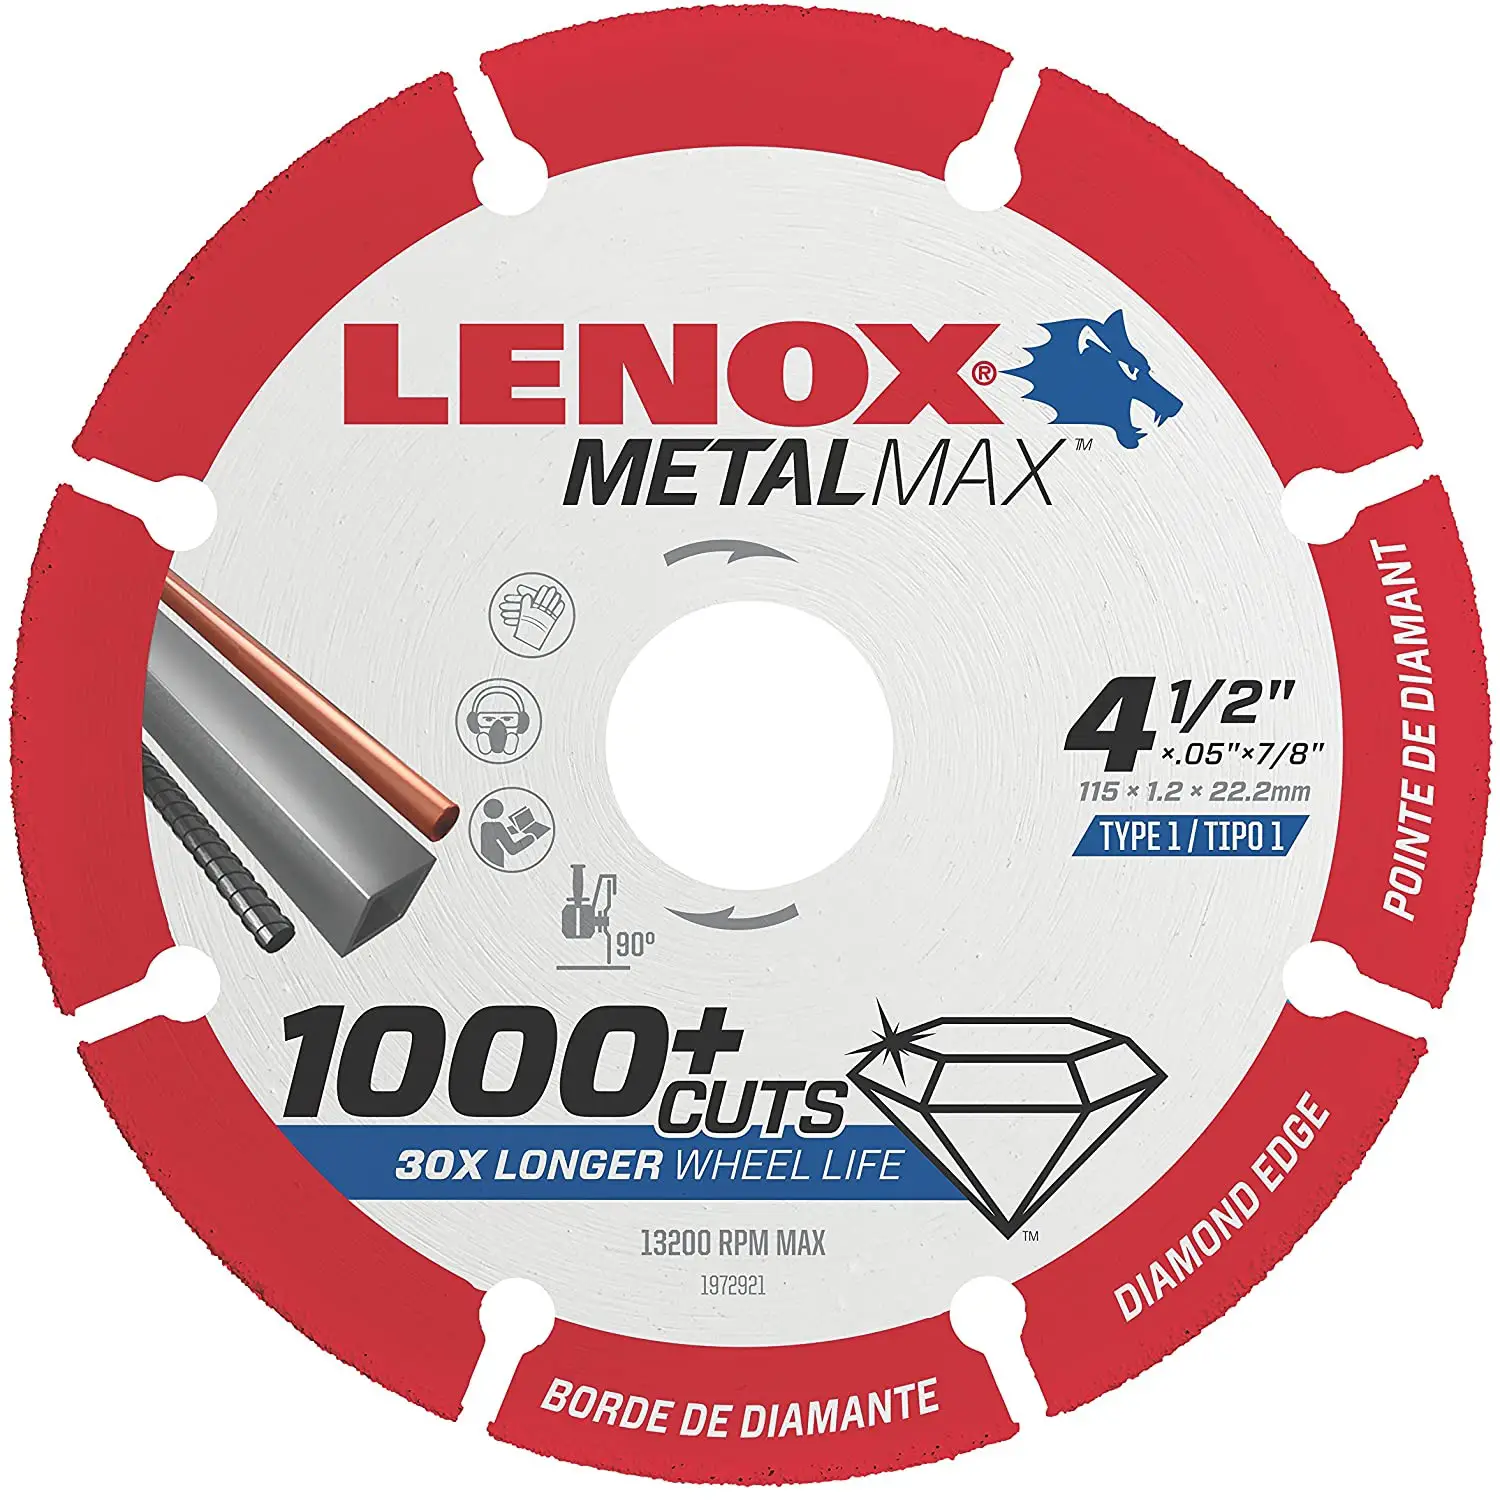 Top 5 Best Angle Grinder Wheels for Cutting Metal [2022 Review